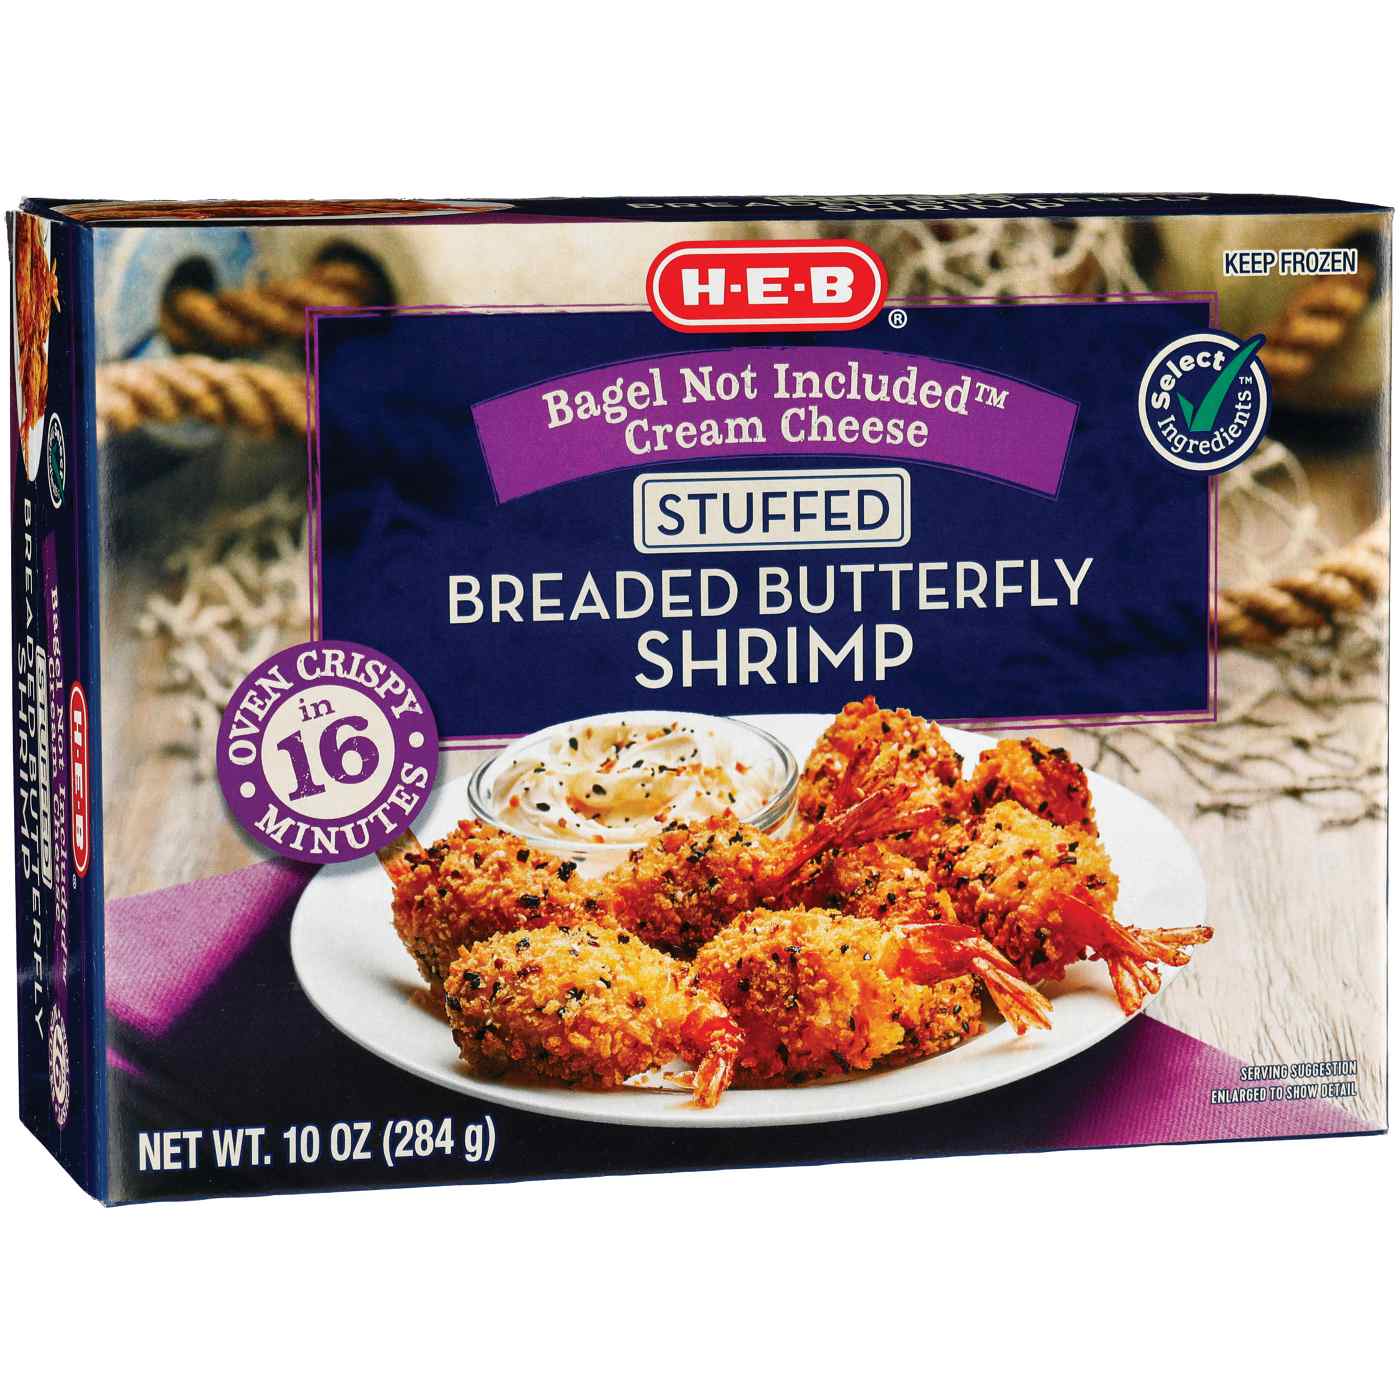 H-E-B Frozen Bagel Not Included Cream Cheese-Stuffed Breaded Butterfly Shrimp; image 2 of 2